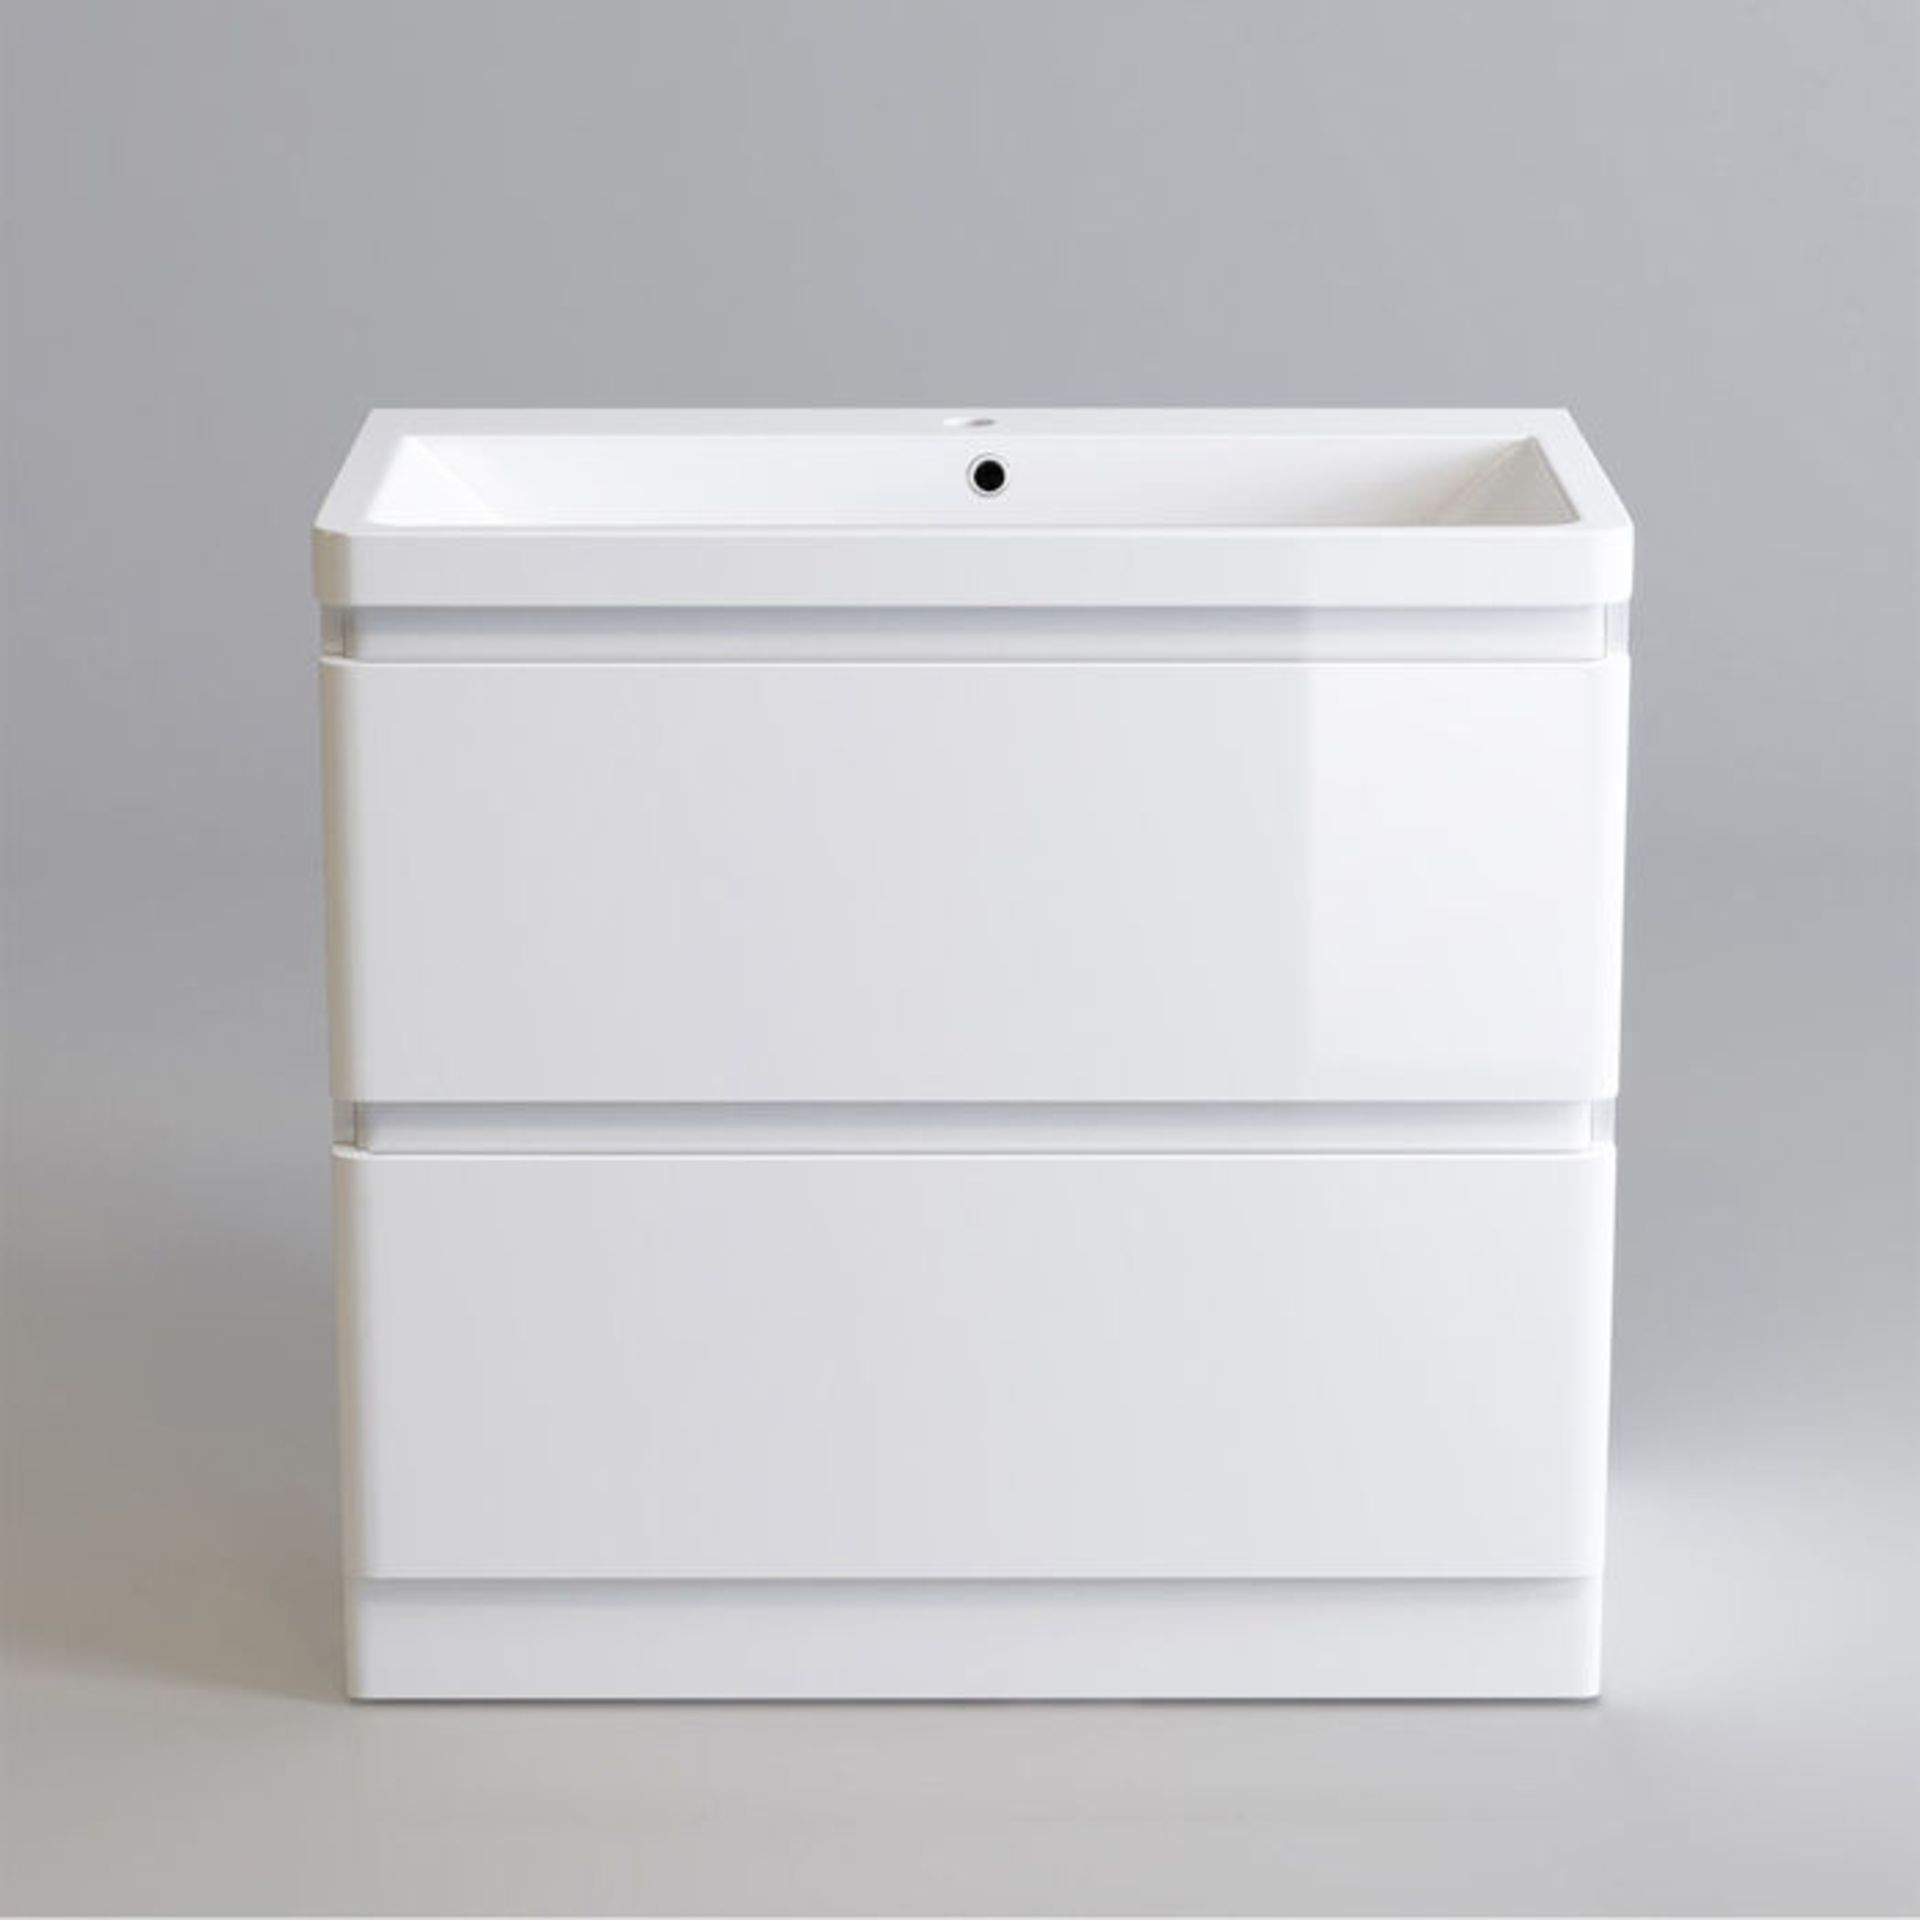 (A23) 800mm Denver Gloss White Built In Sink Drawer Unit - Floor Standing. RRP £549.99. Comes ... - Image 4 of 4